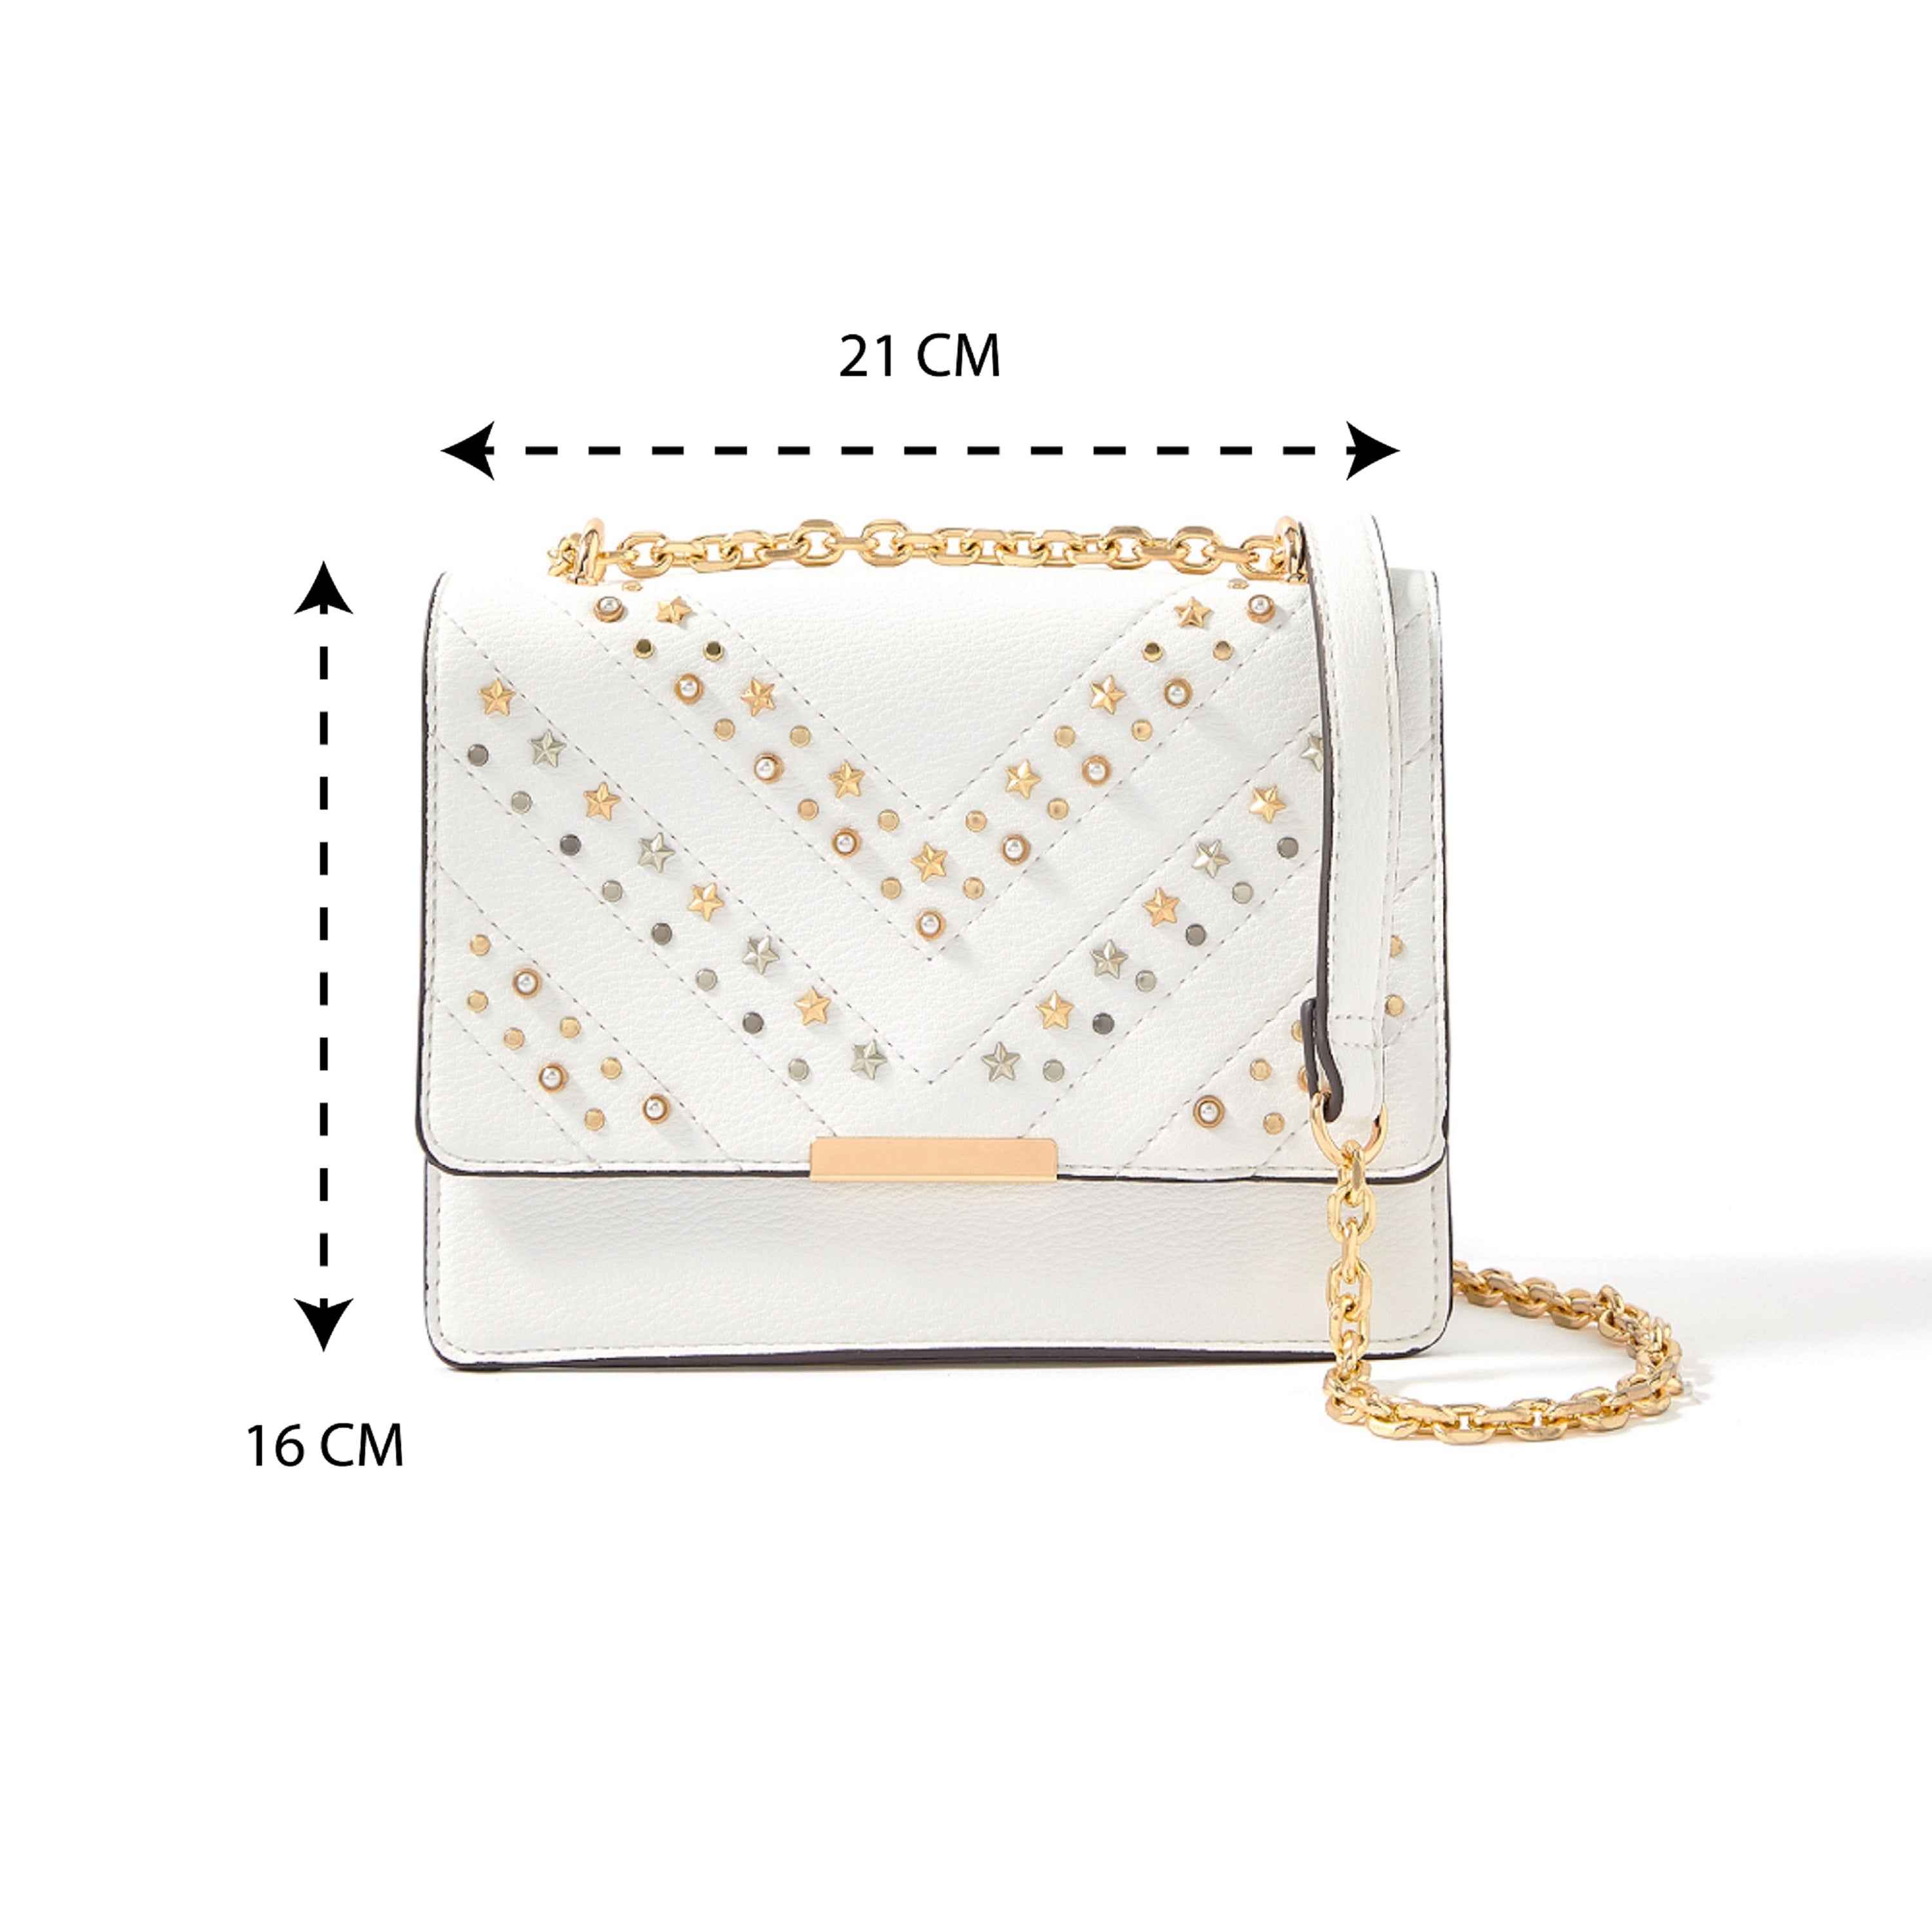 Accessorize London women's Faux Leather White Studded Shoulder Sling bag